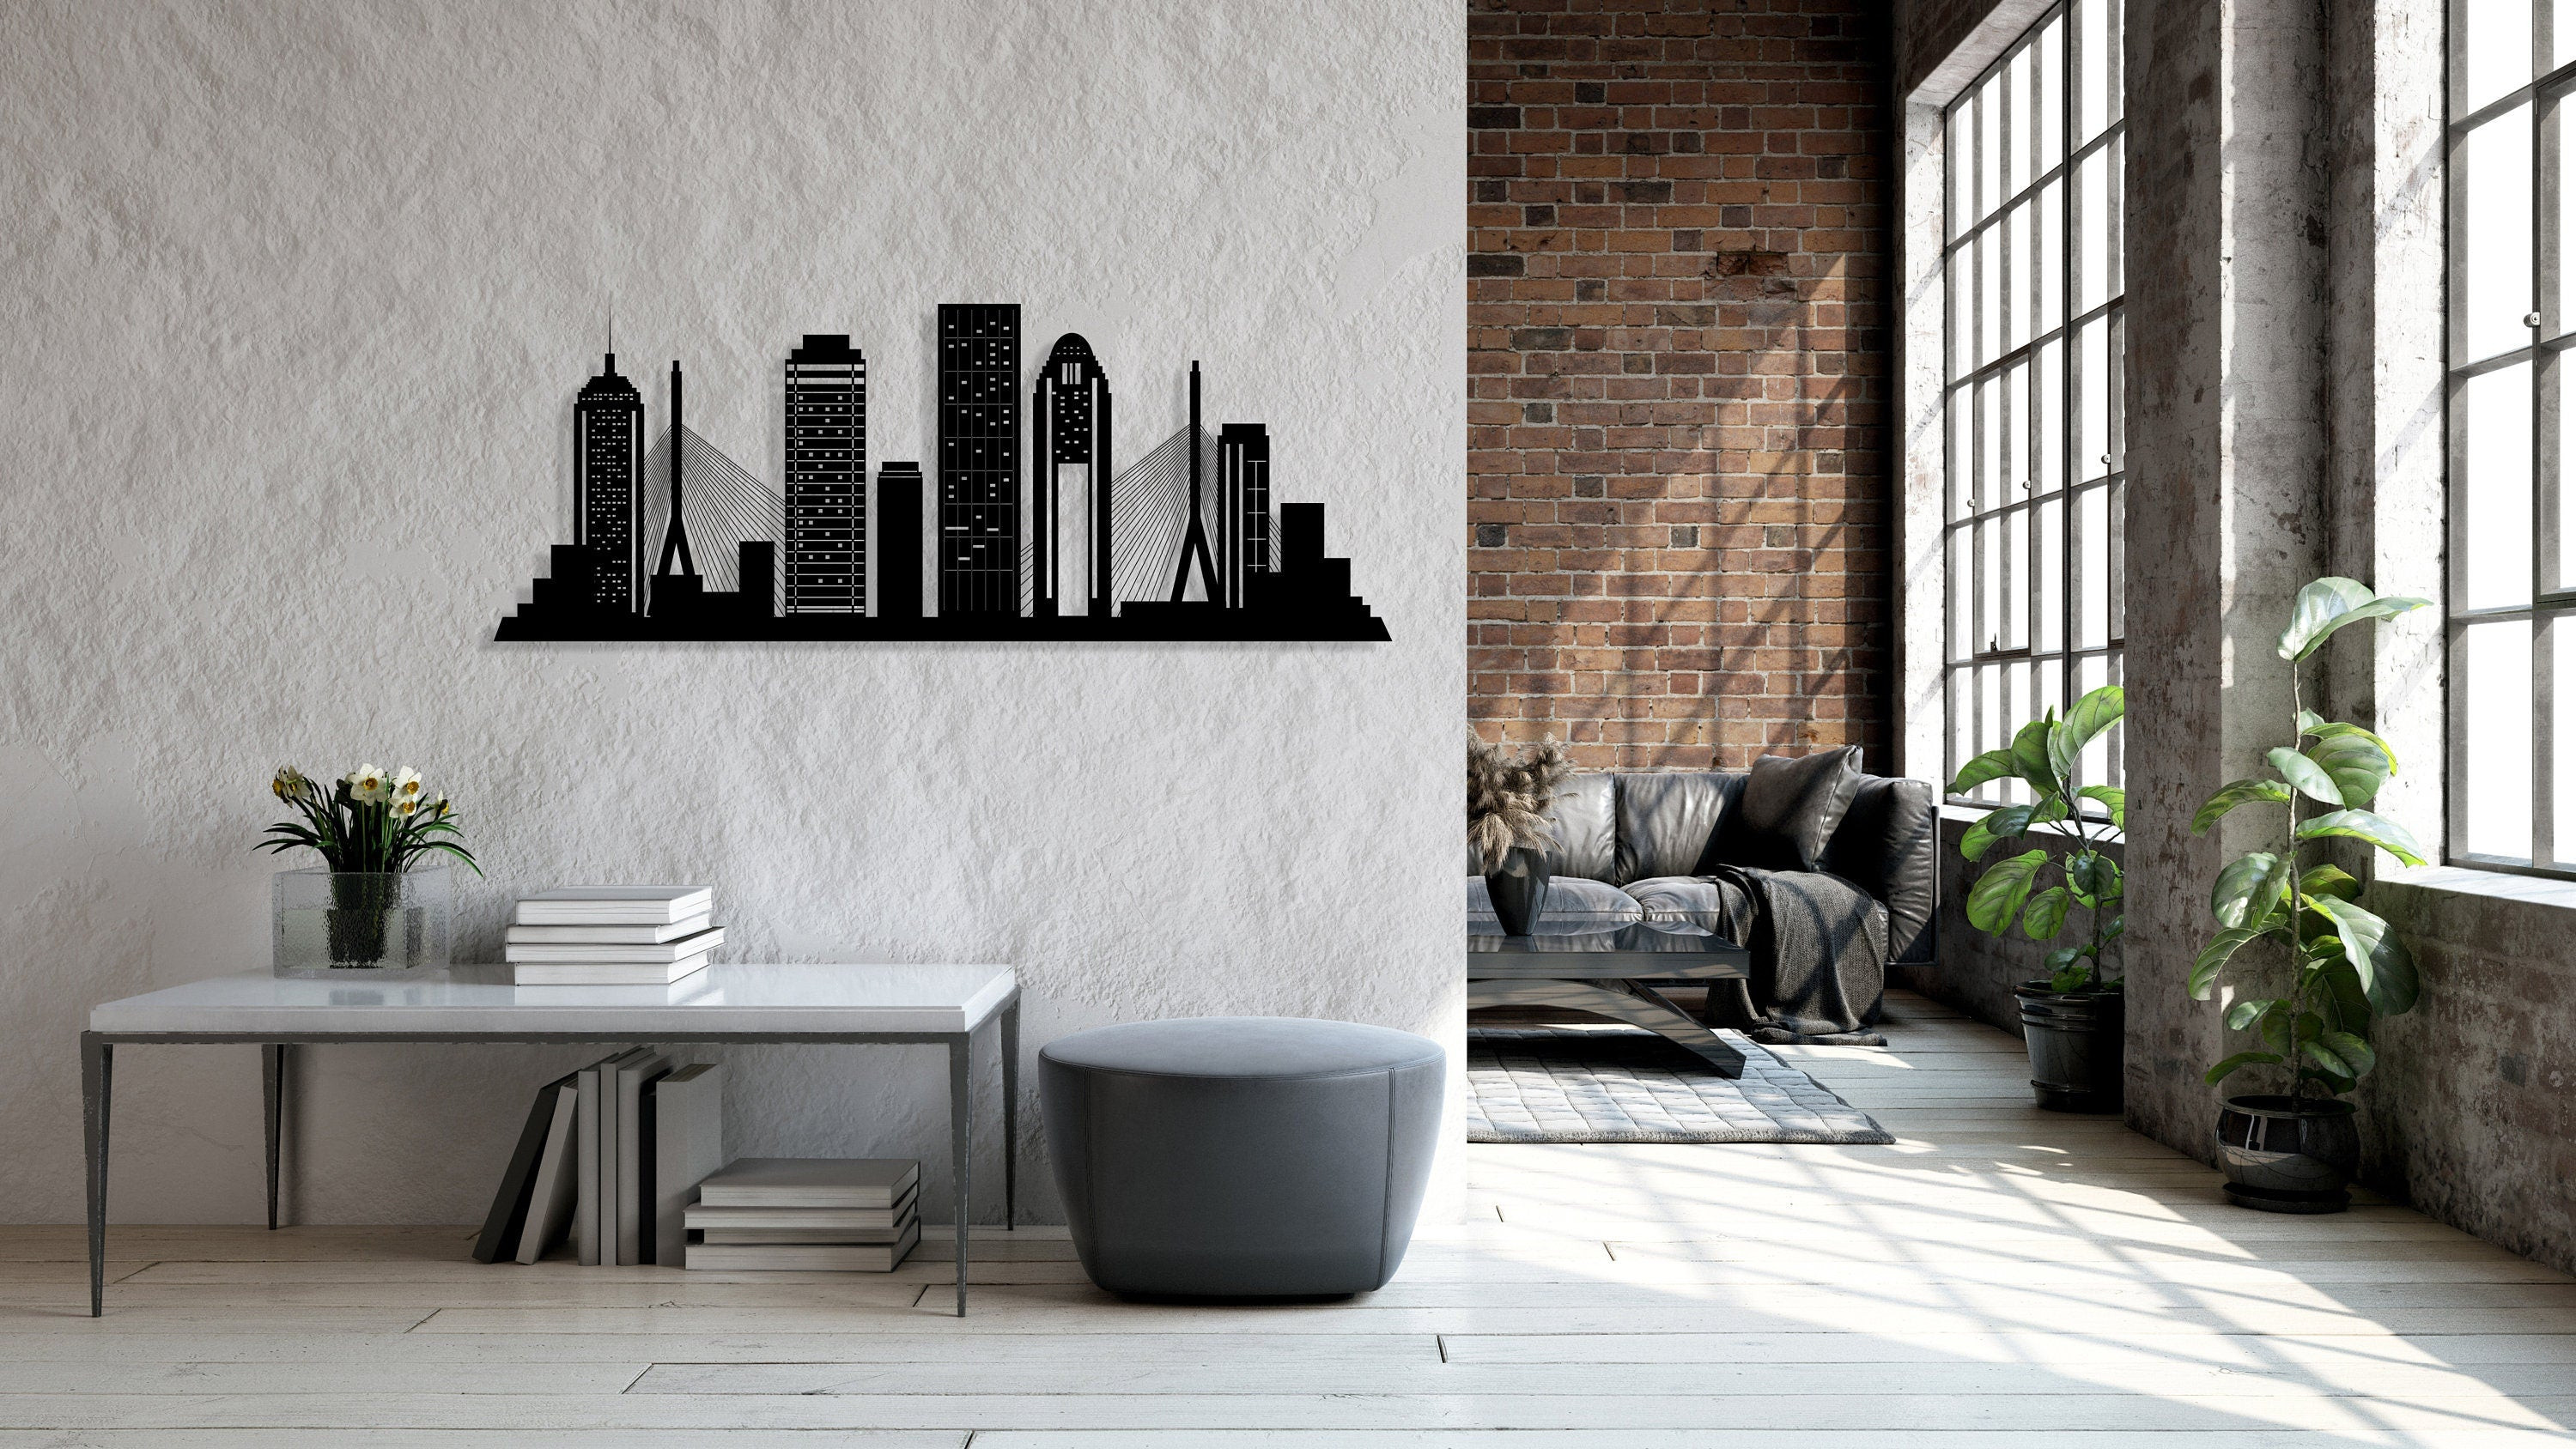 Boston City Silhouette Metal Wall Art, Metal Wall Decor, Housewarming Gift, Home Office Living Room Decoration, Wall Hangings,, Metal Laser Cut Metal Signs Custom Gift Ideas 14x14IN